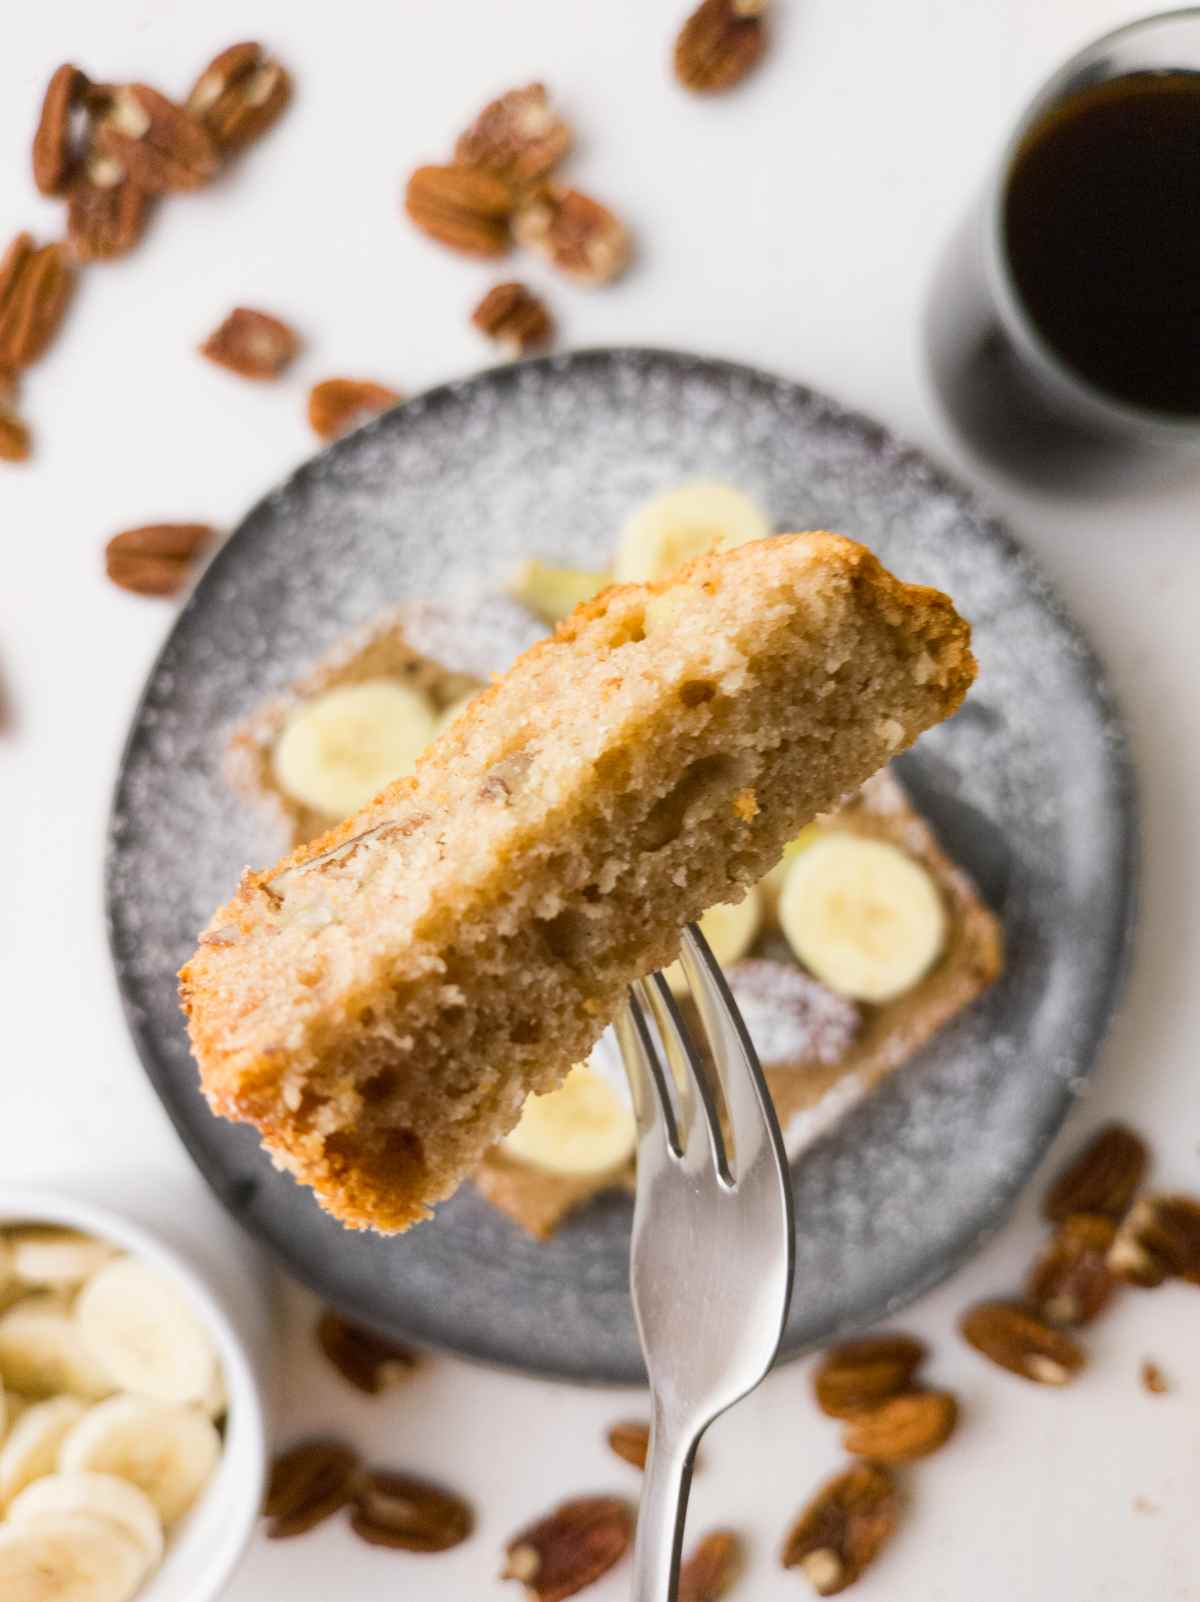 A slice of the banana bread up close on a fork.